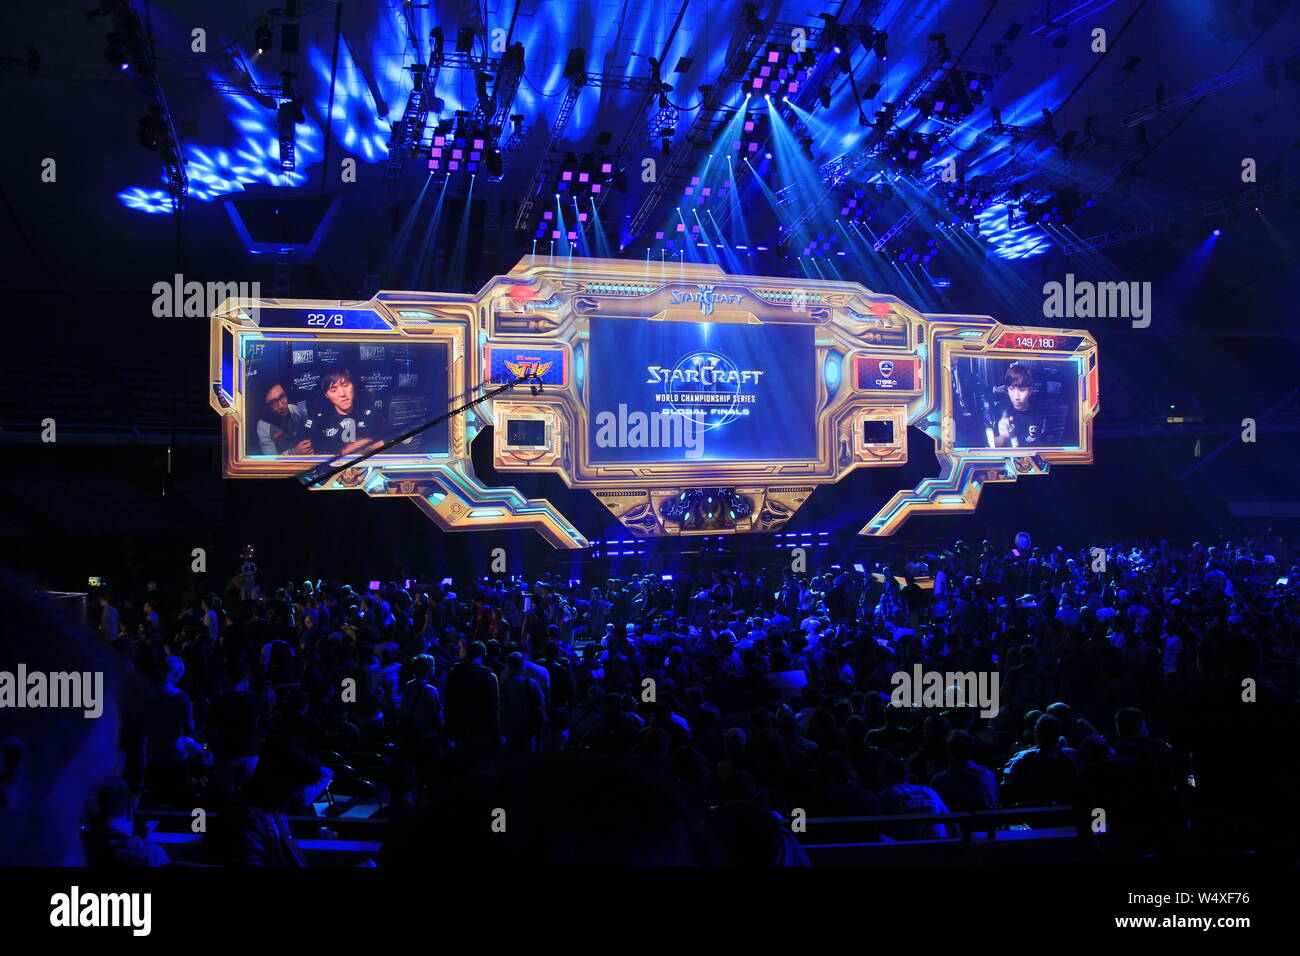 StarCraft video game World Championship at BlizzCon 2015 in Anaheim, California, sponsored by Blizzard Entertainment. Stock Photo